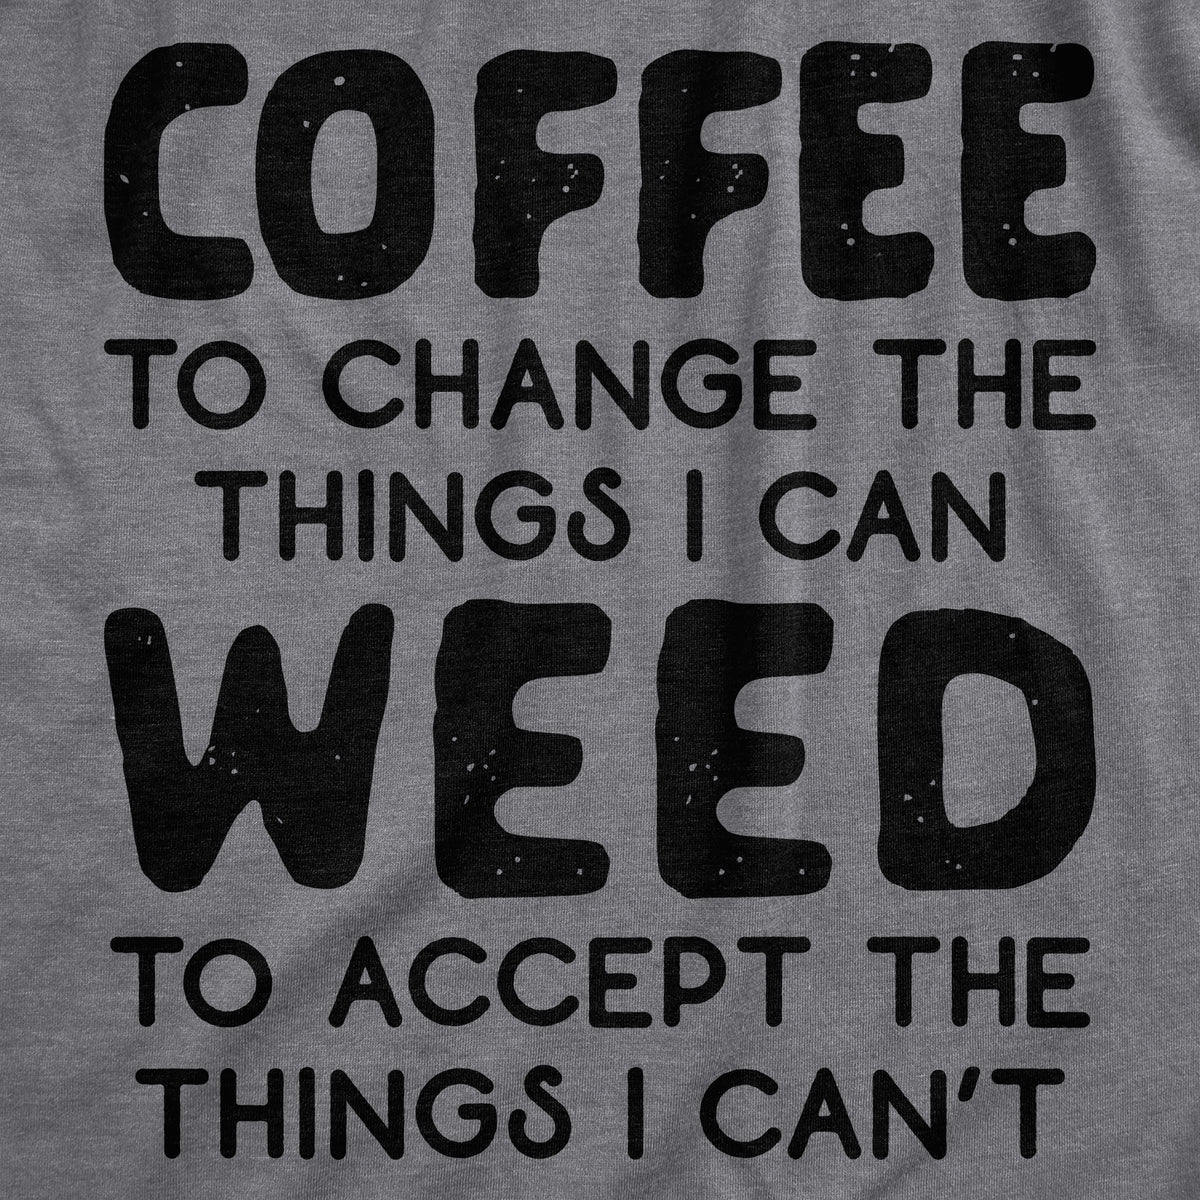 Coffee To Change The Things I Can Weed To Accept The Things I Can&#39;t Women&#39;s T Shirt